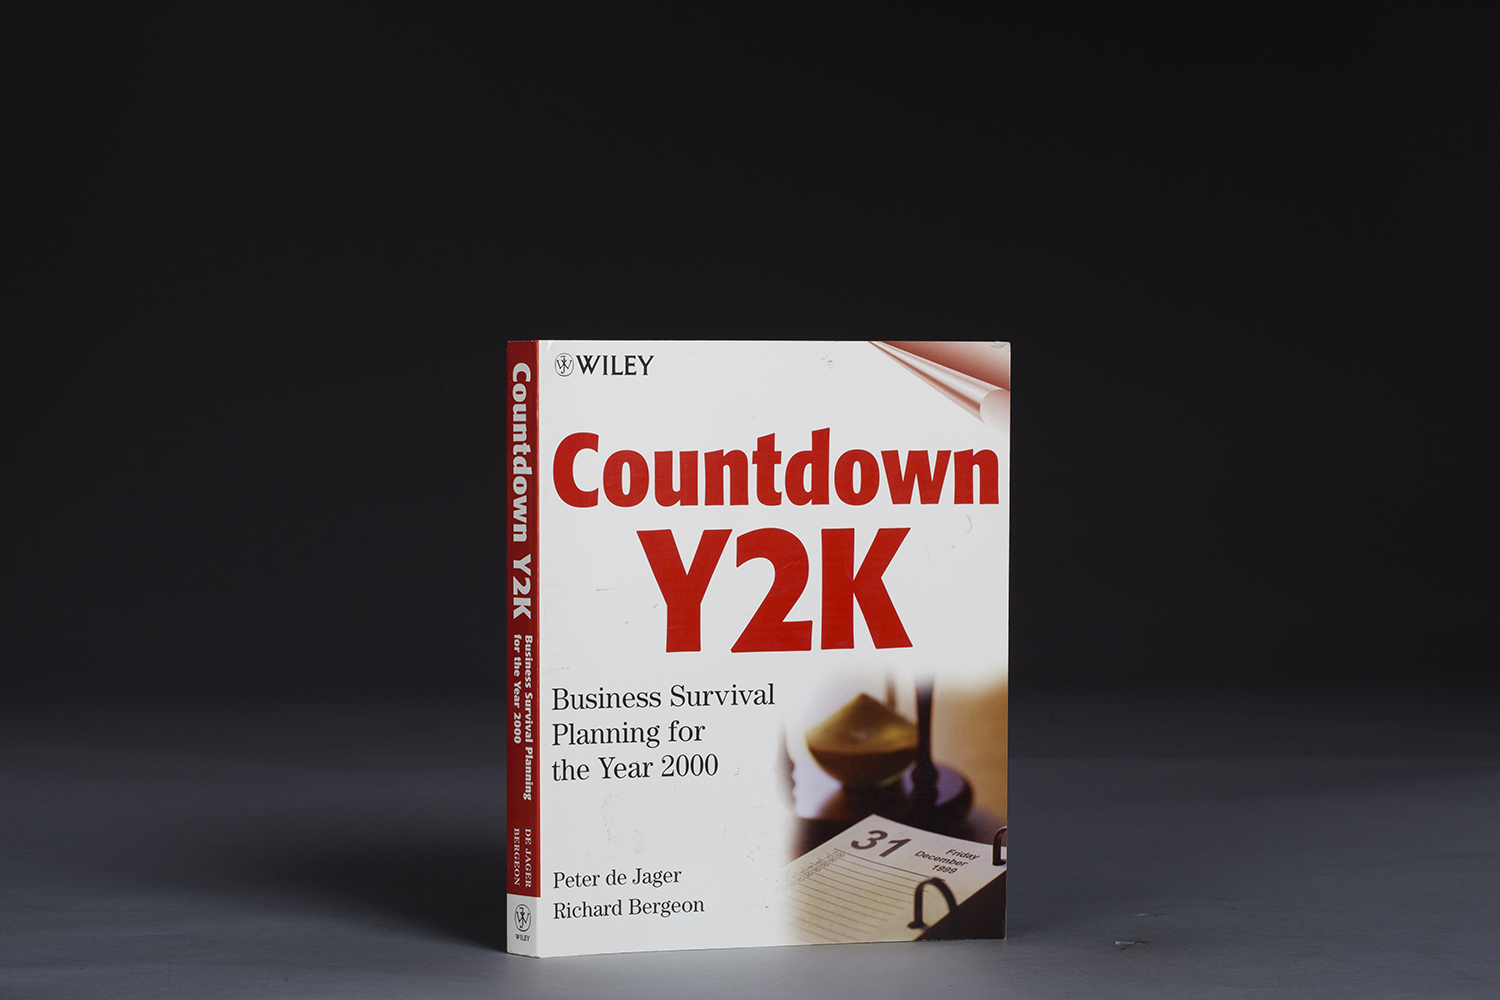 Countdown Y2K Business Survival Planning - 0999 Cover.jpg